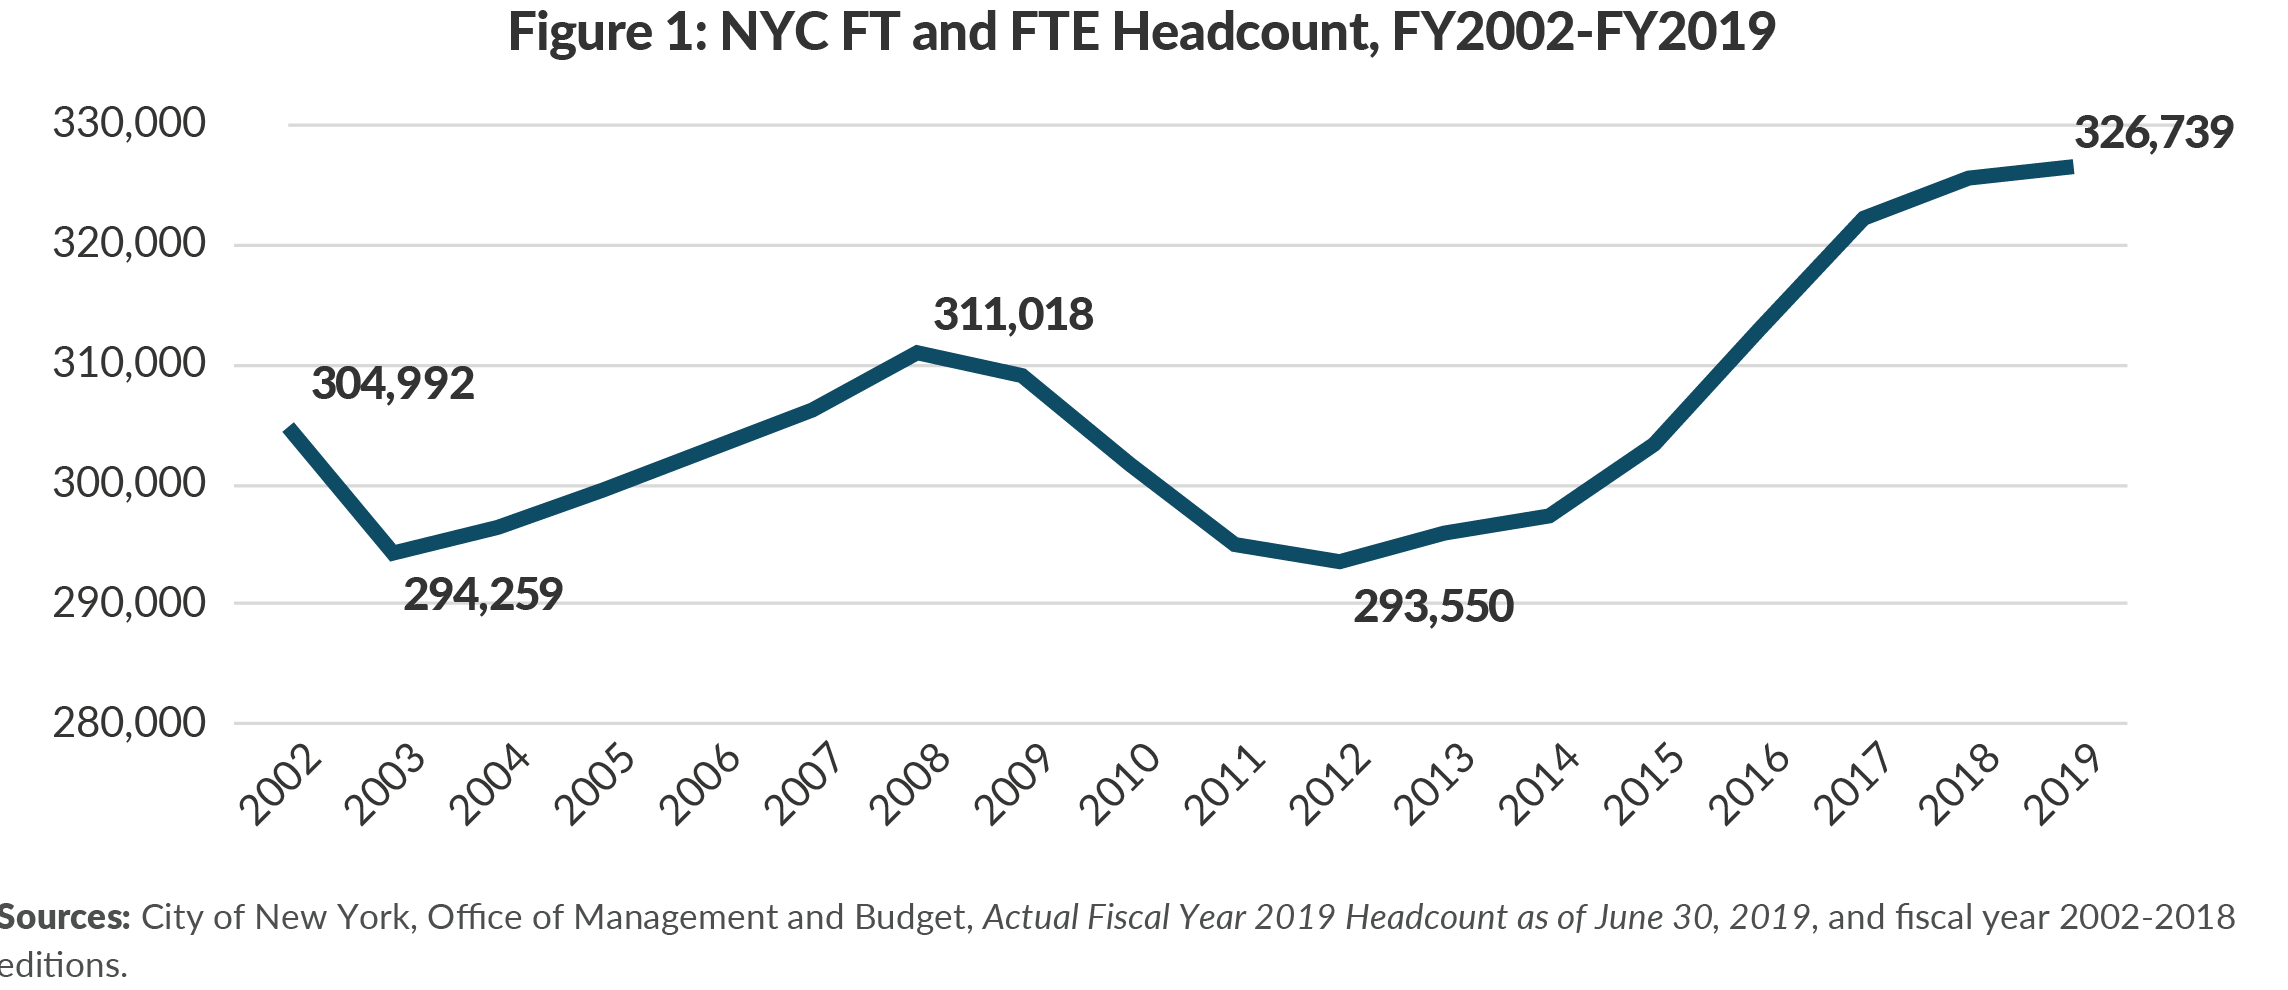 Figure 1. NYC FT and FTE Headcount, FY2002-FY2019